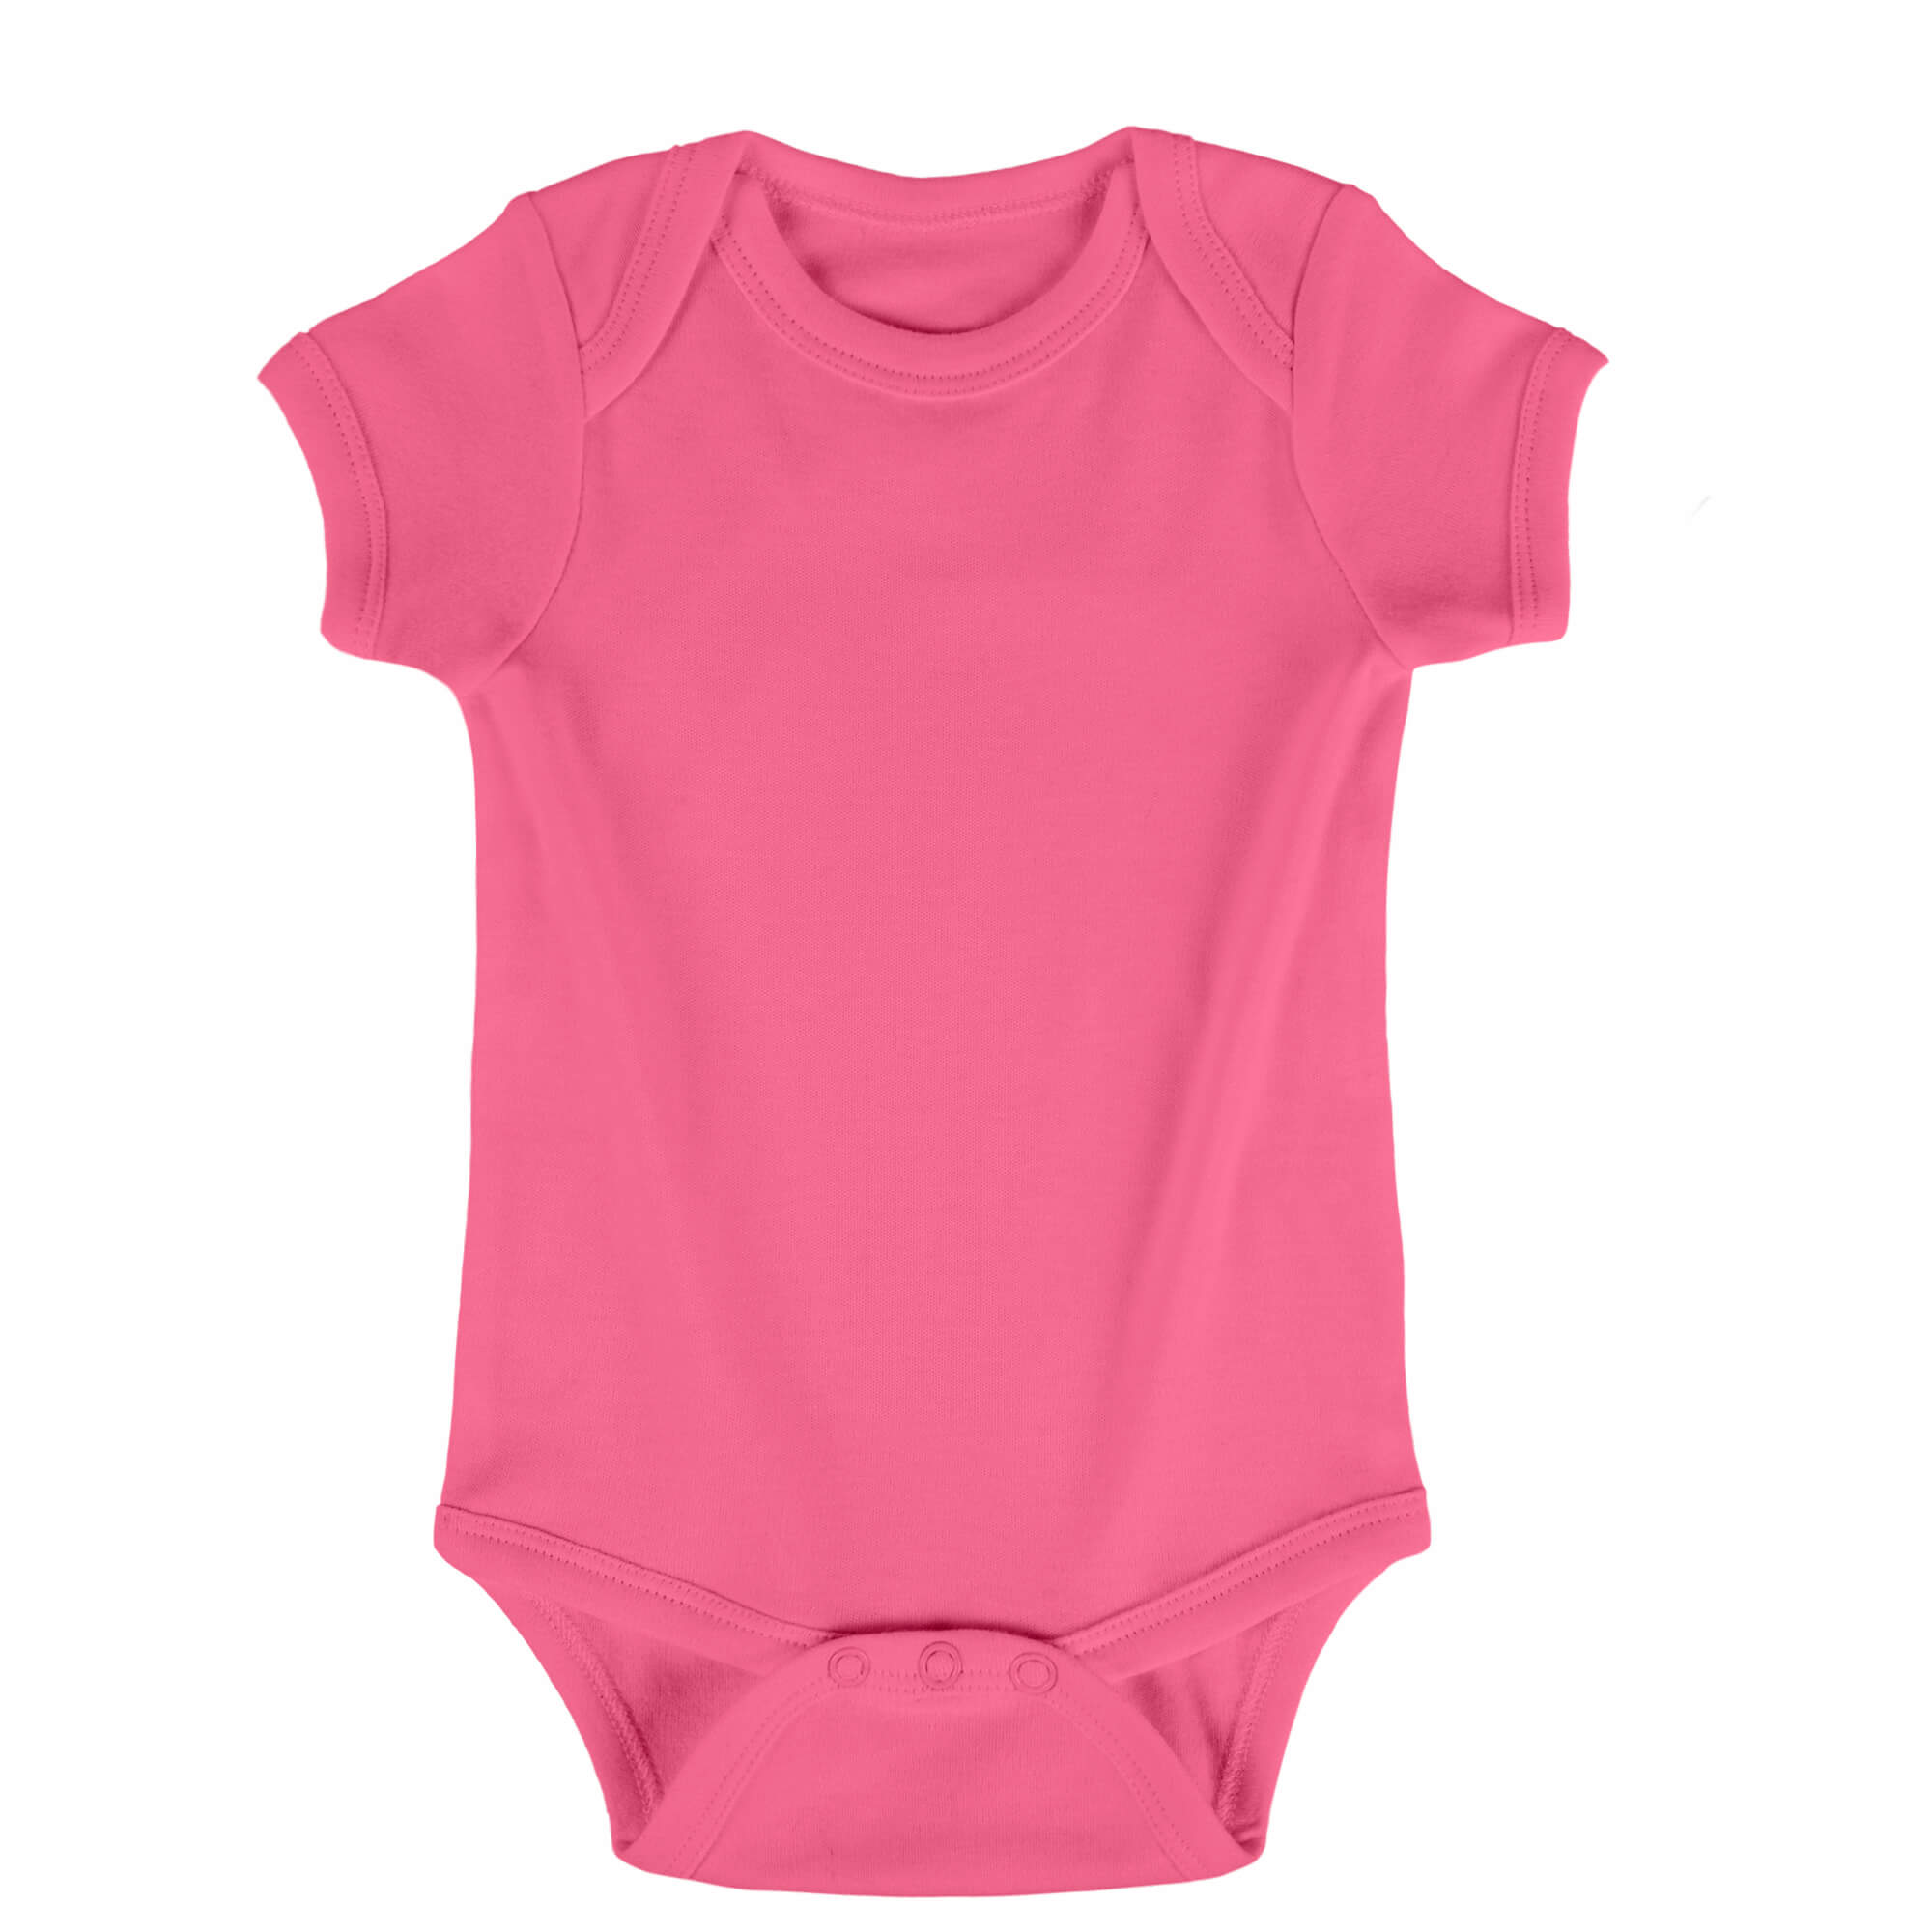 dark pink color number #77, onesie color selection, and color display.